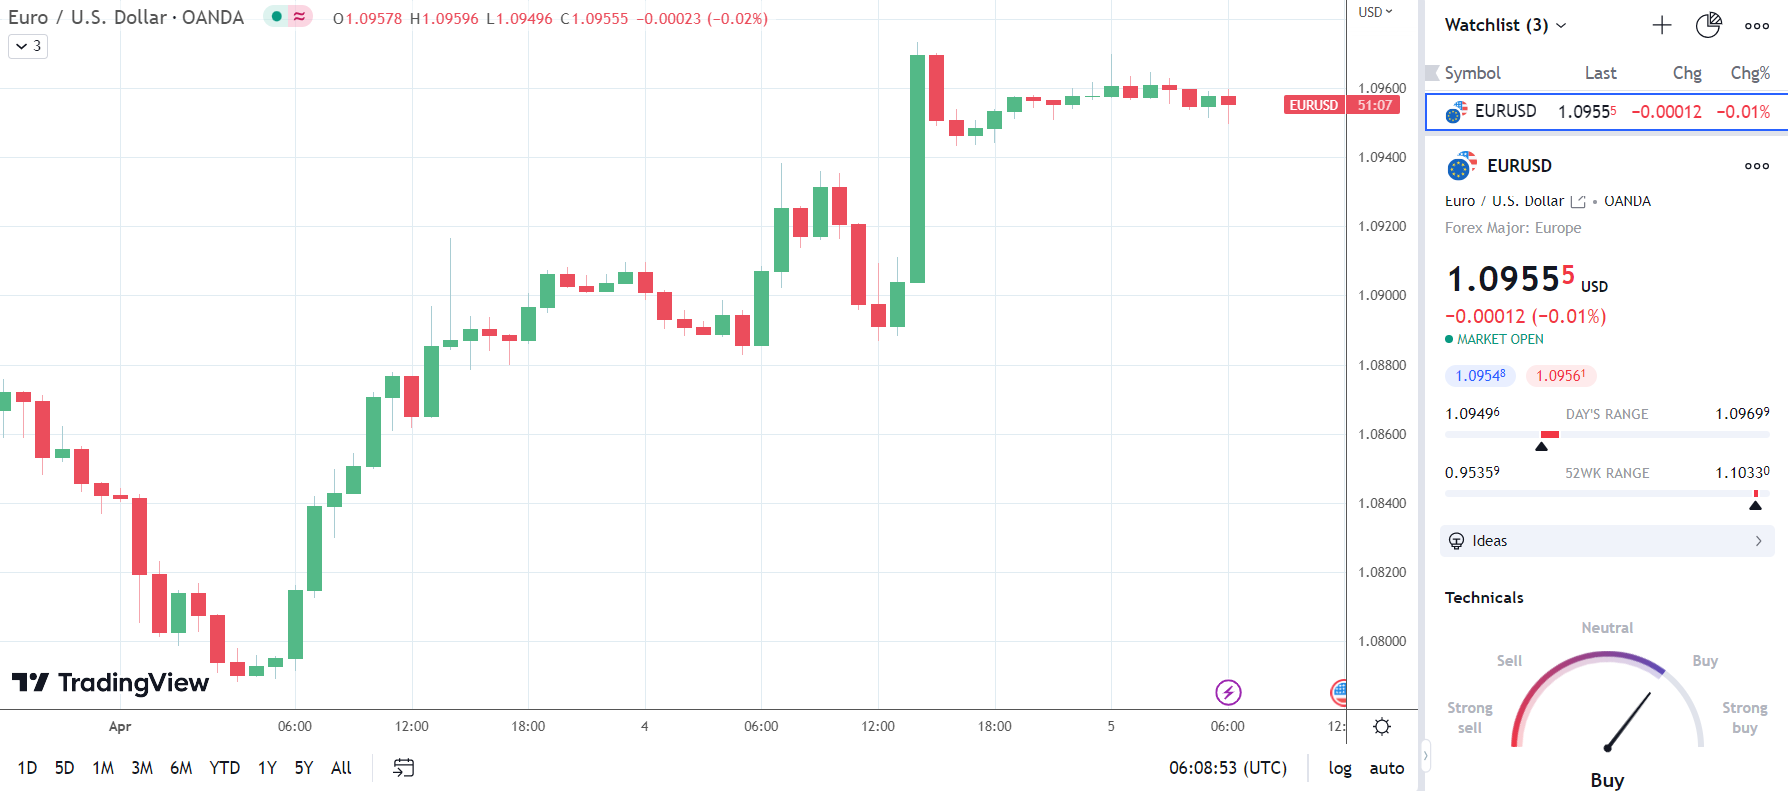 EUR/USD falls in response to factory order numbers.